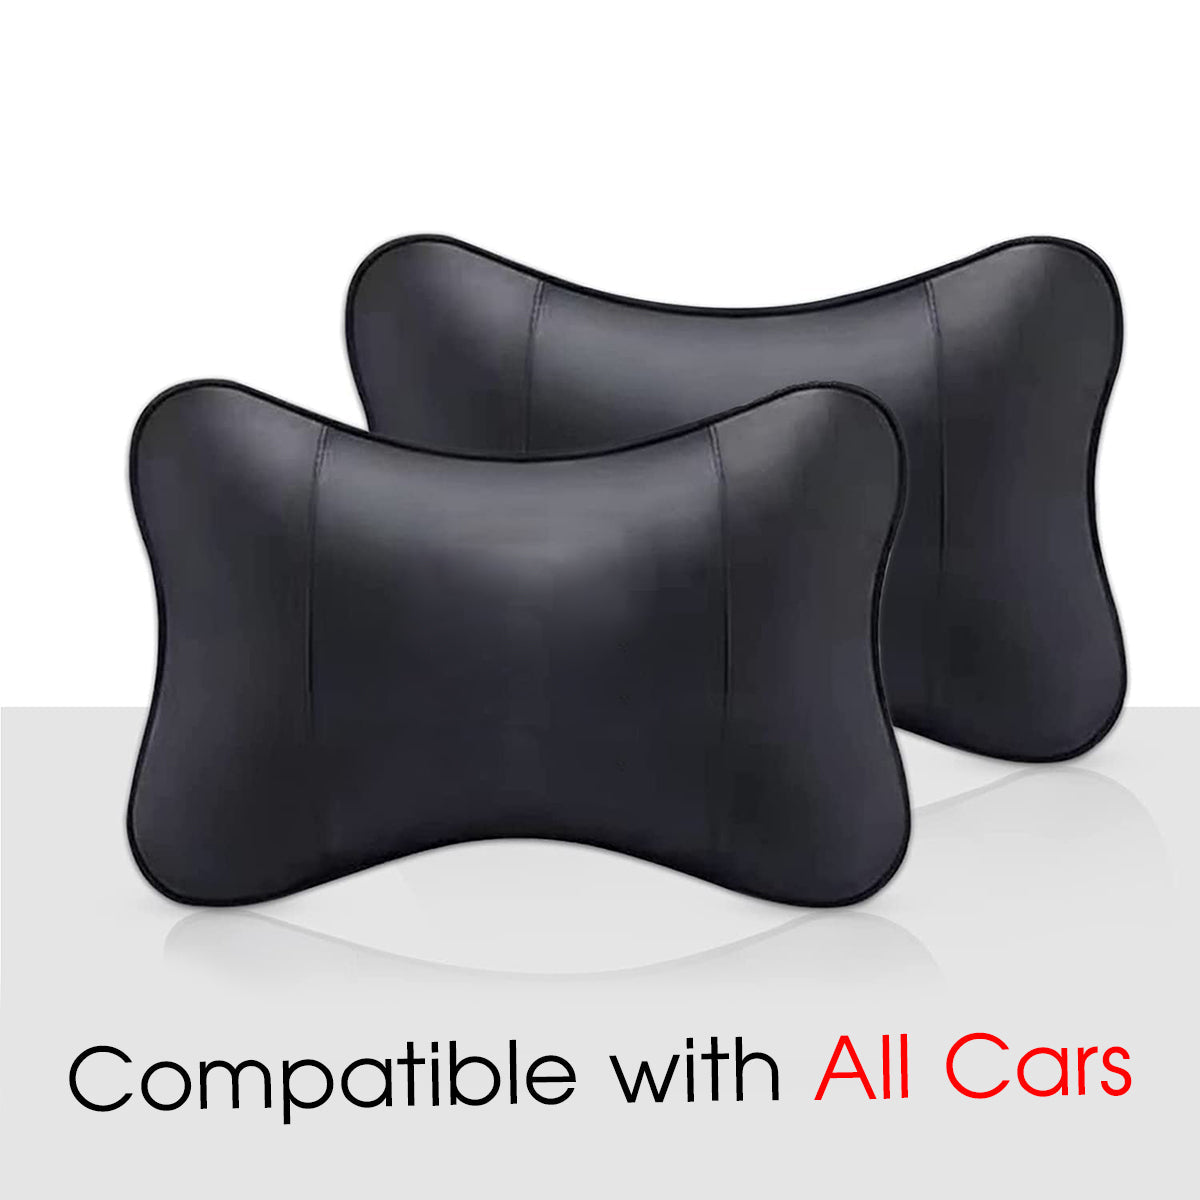 Acura Car Seat Headrests Enhance Comfort and Safety for Your Drive